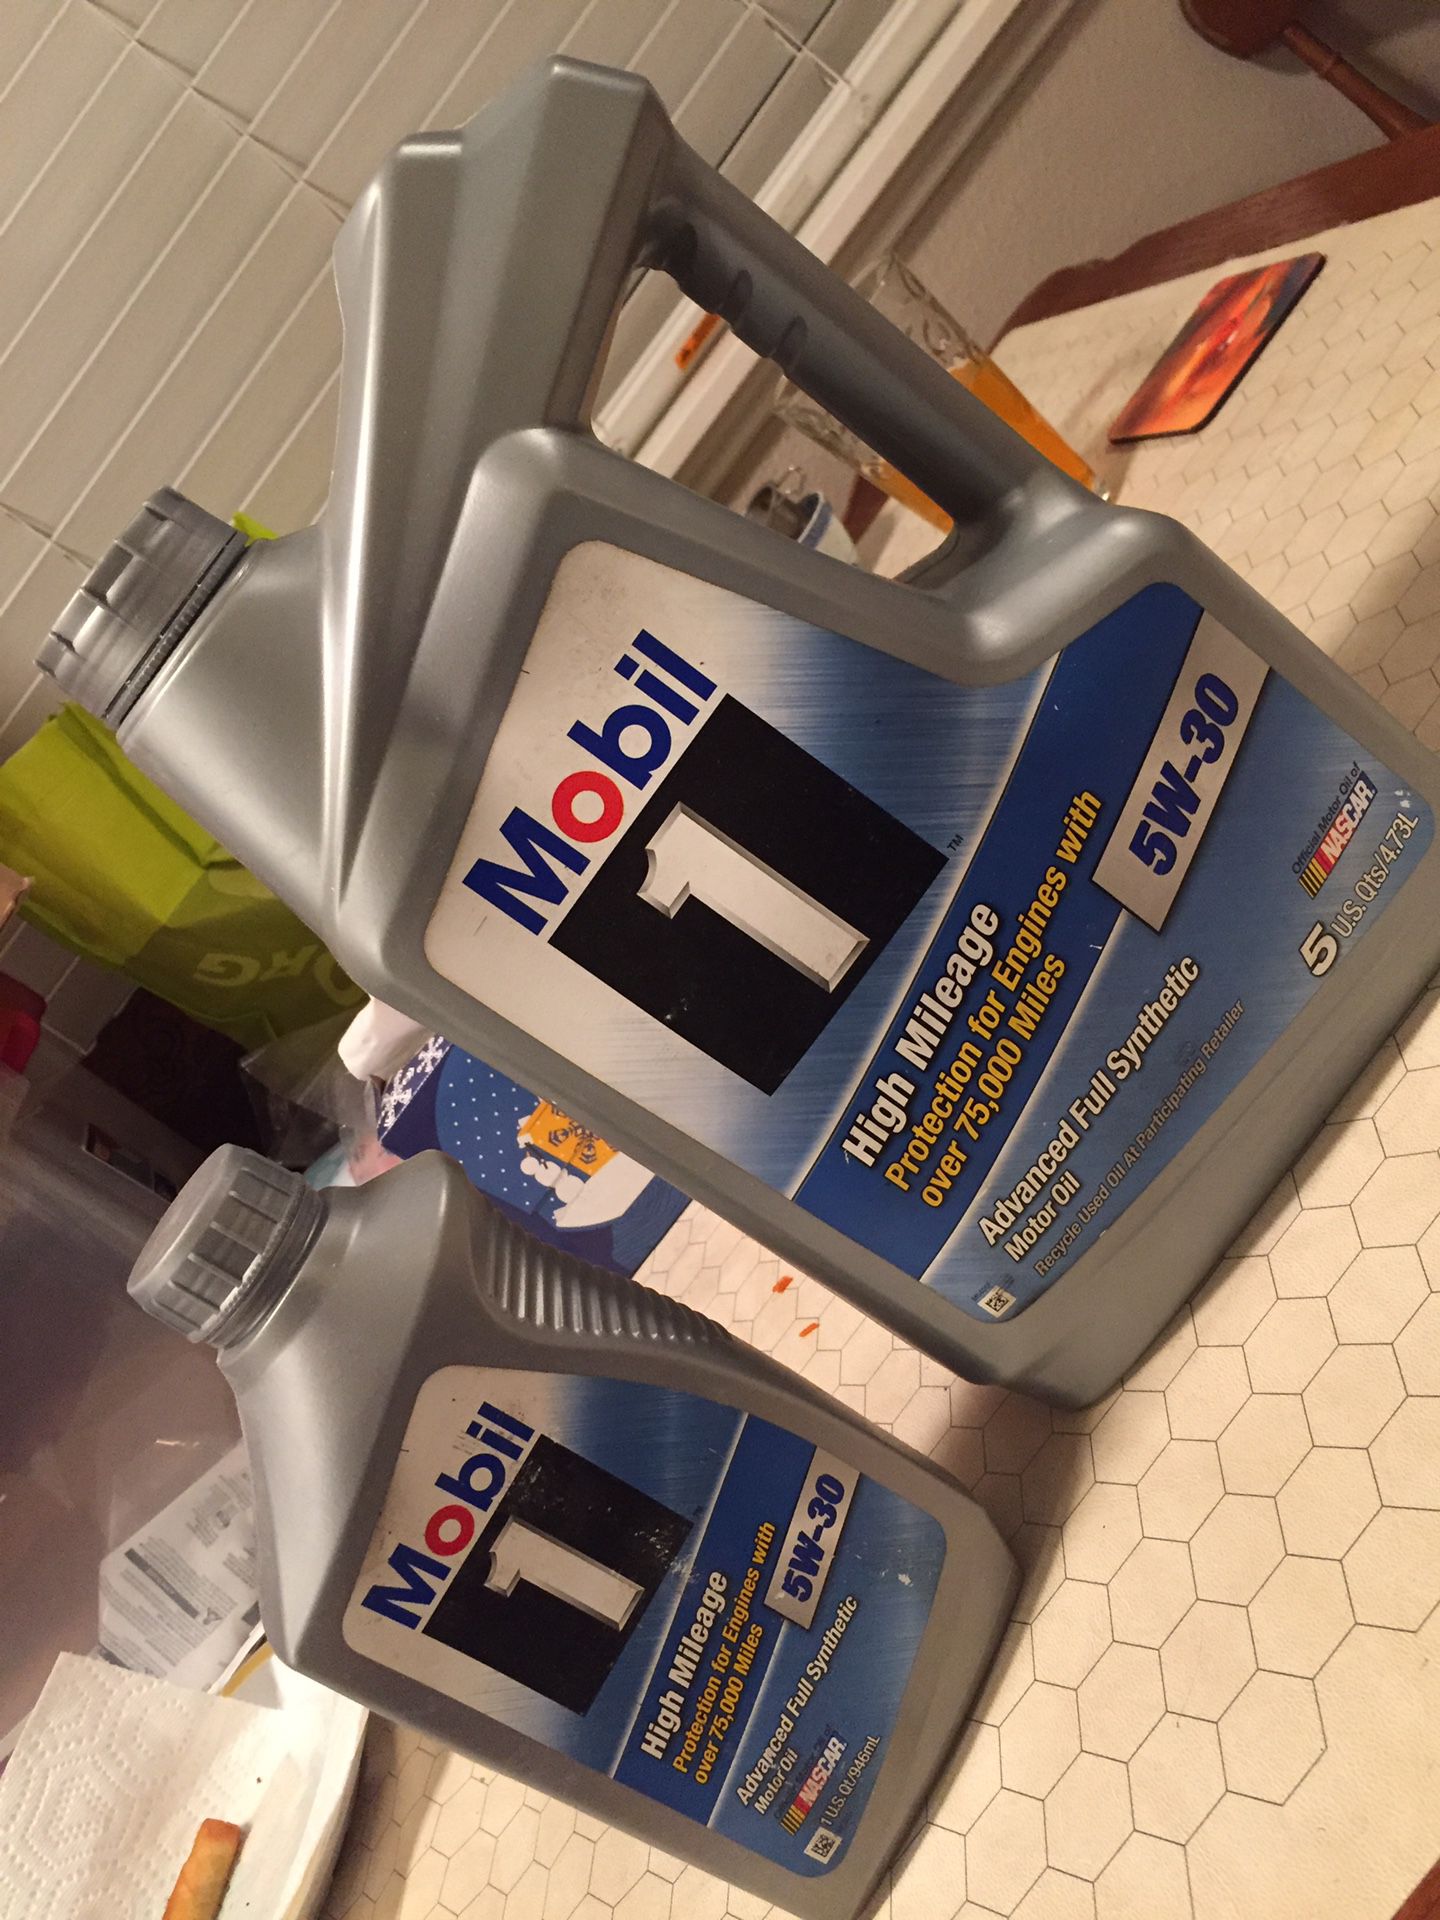 Mobil 1 5w-30 engine oil, 6qts unopened